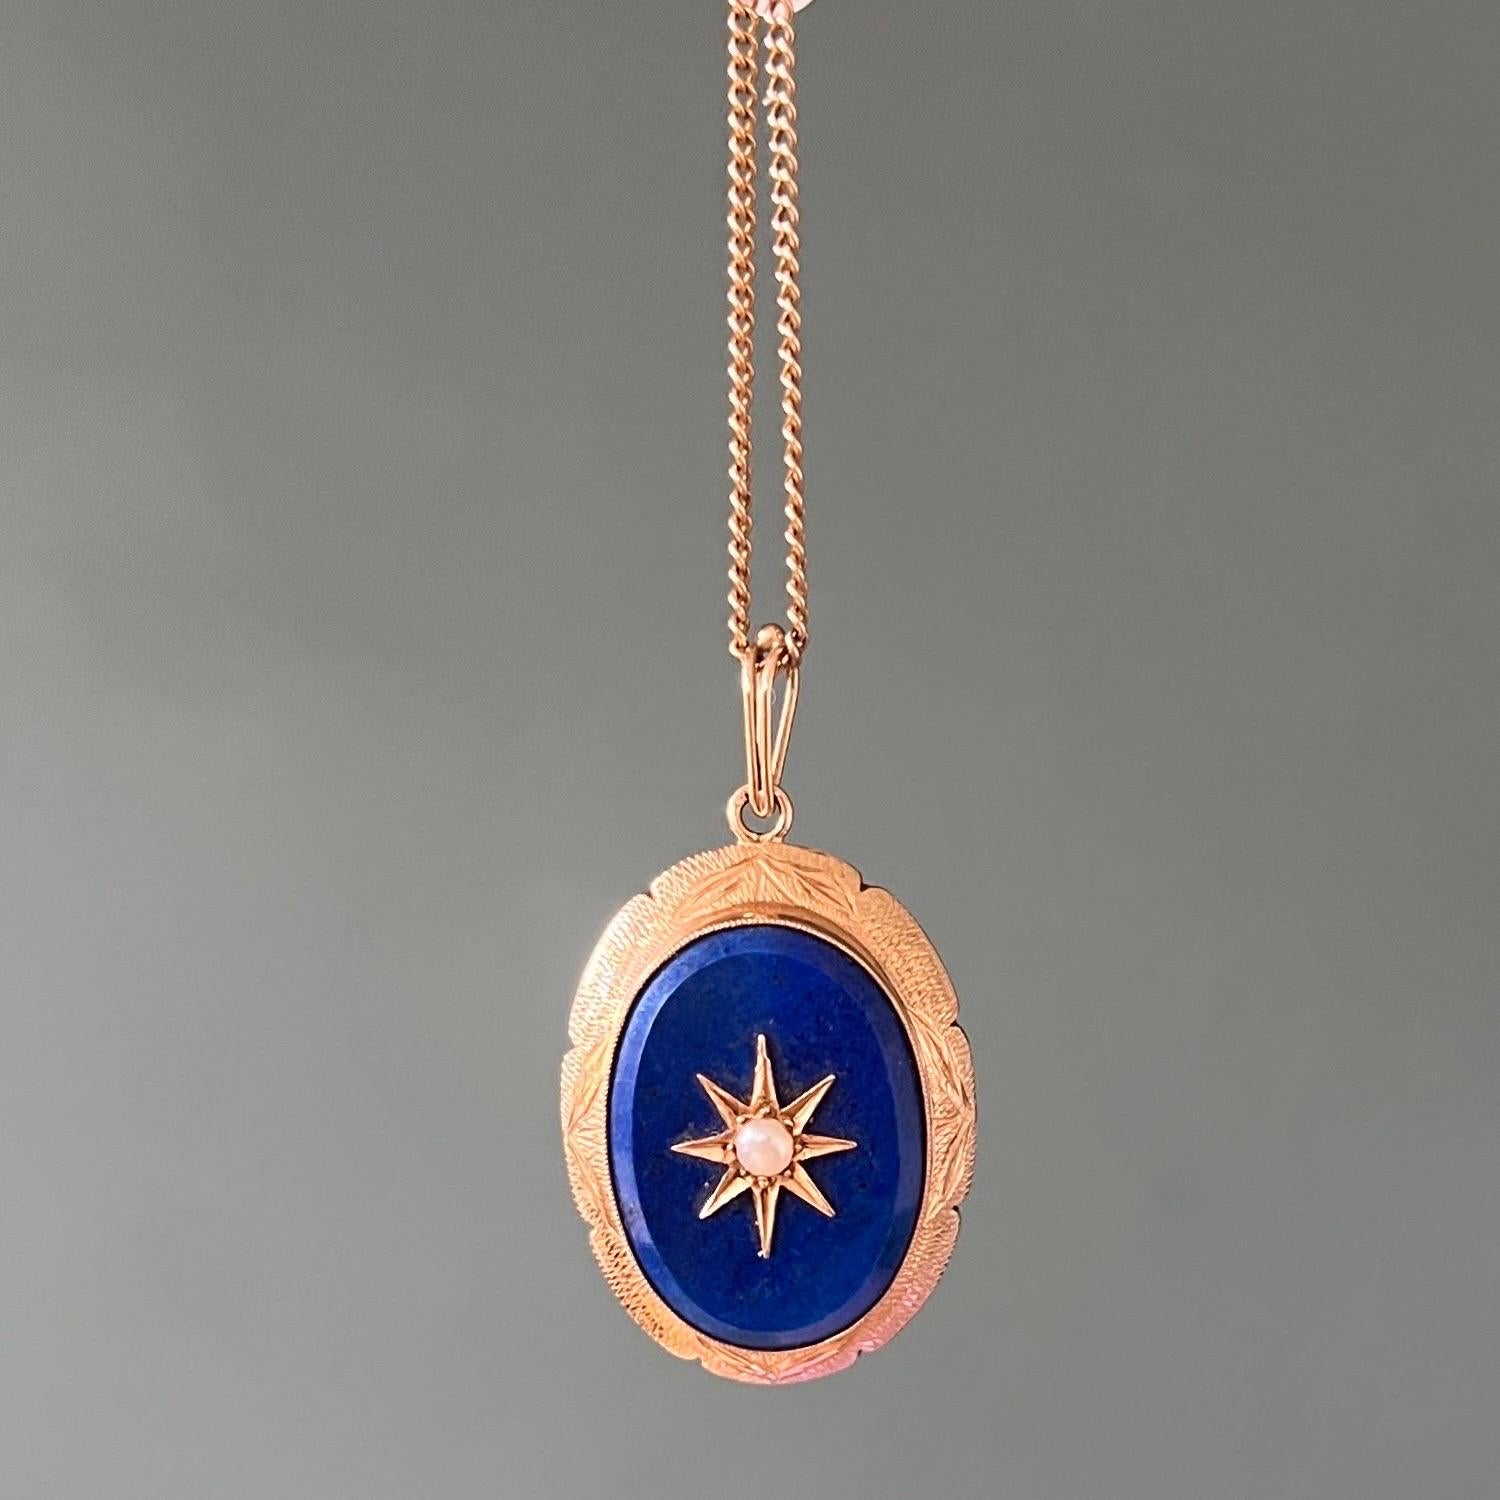 A vintage 14 karat gold oval-shaped pendant set with a lapis lazuli gemstone. A cultured pearl is placed in a gold star in the center. The lapis lazuli is smoothly polished and has a beautiful blue hue. The gold eight-pointed star represents a